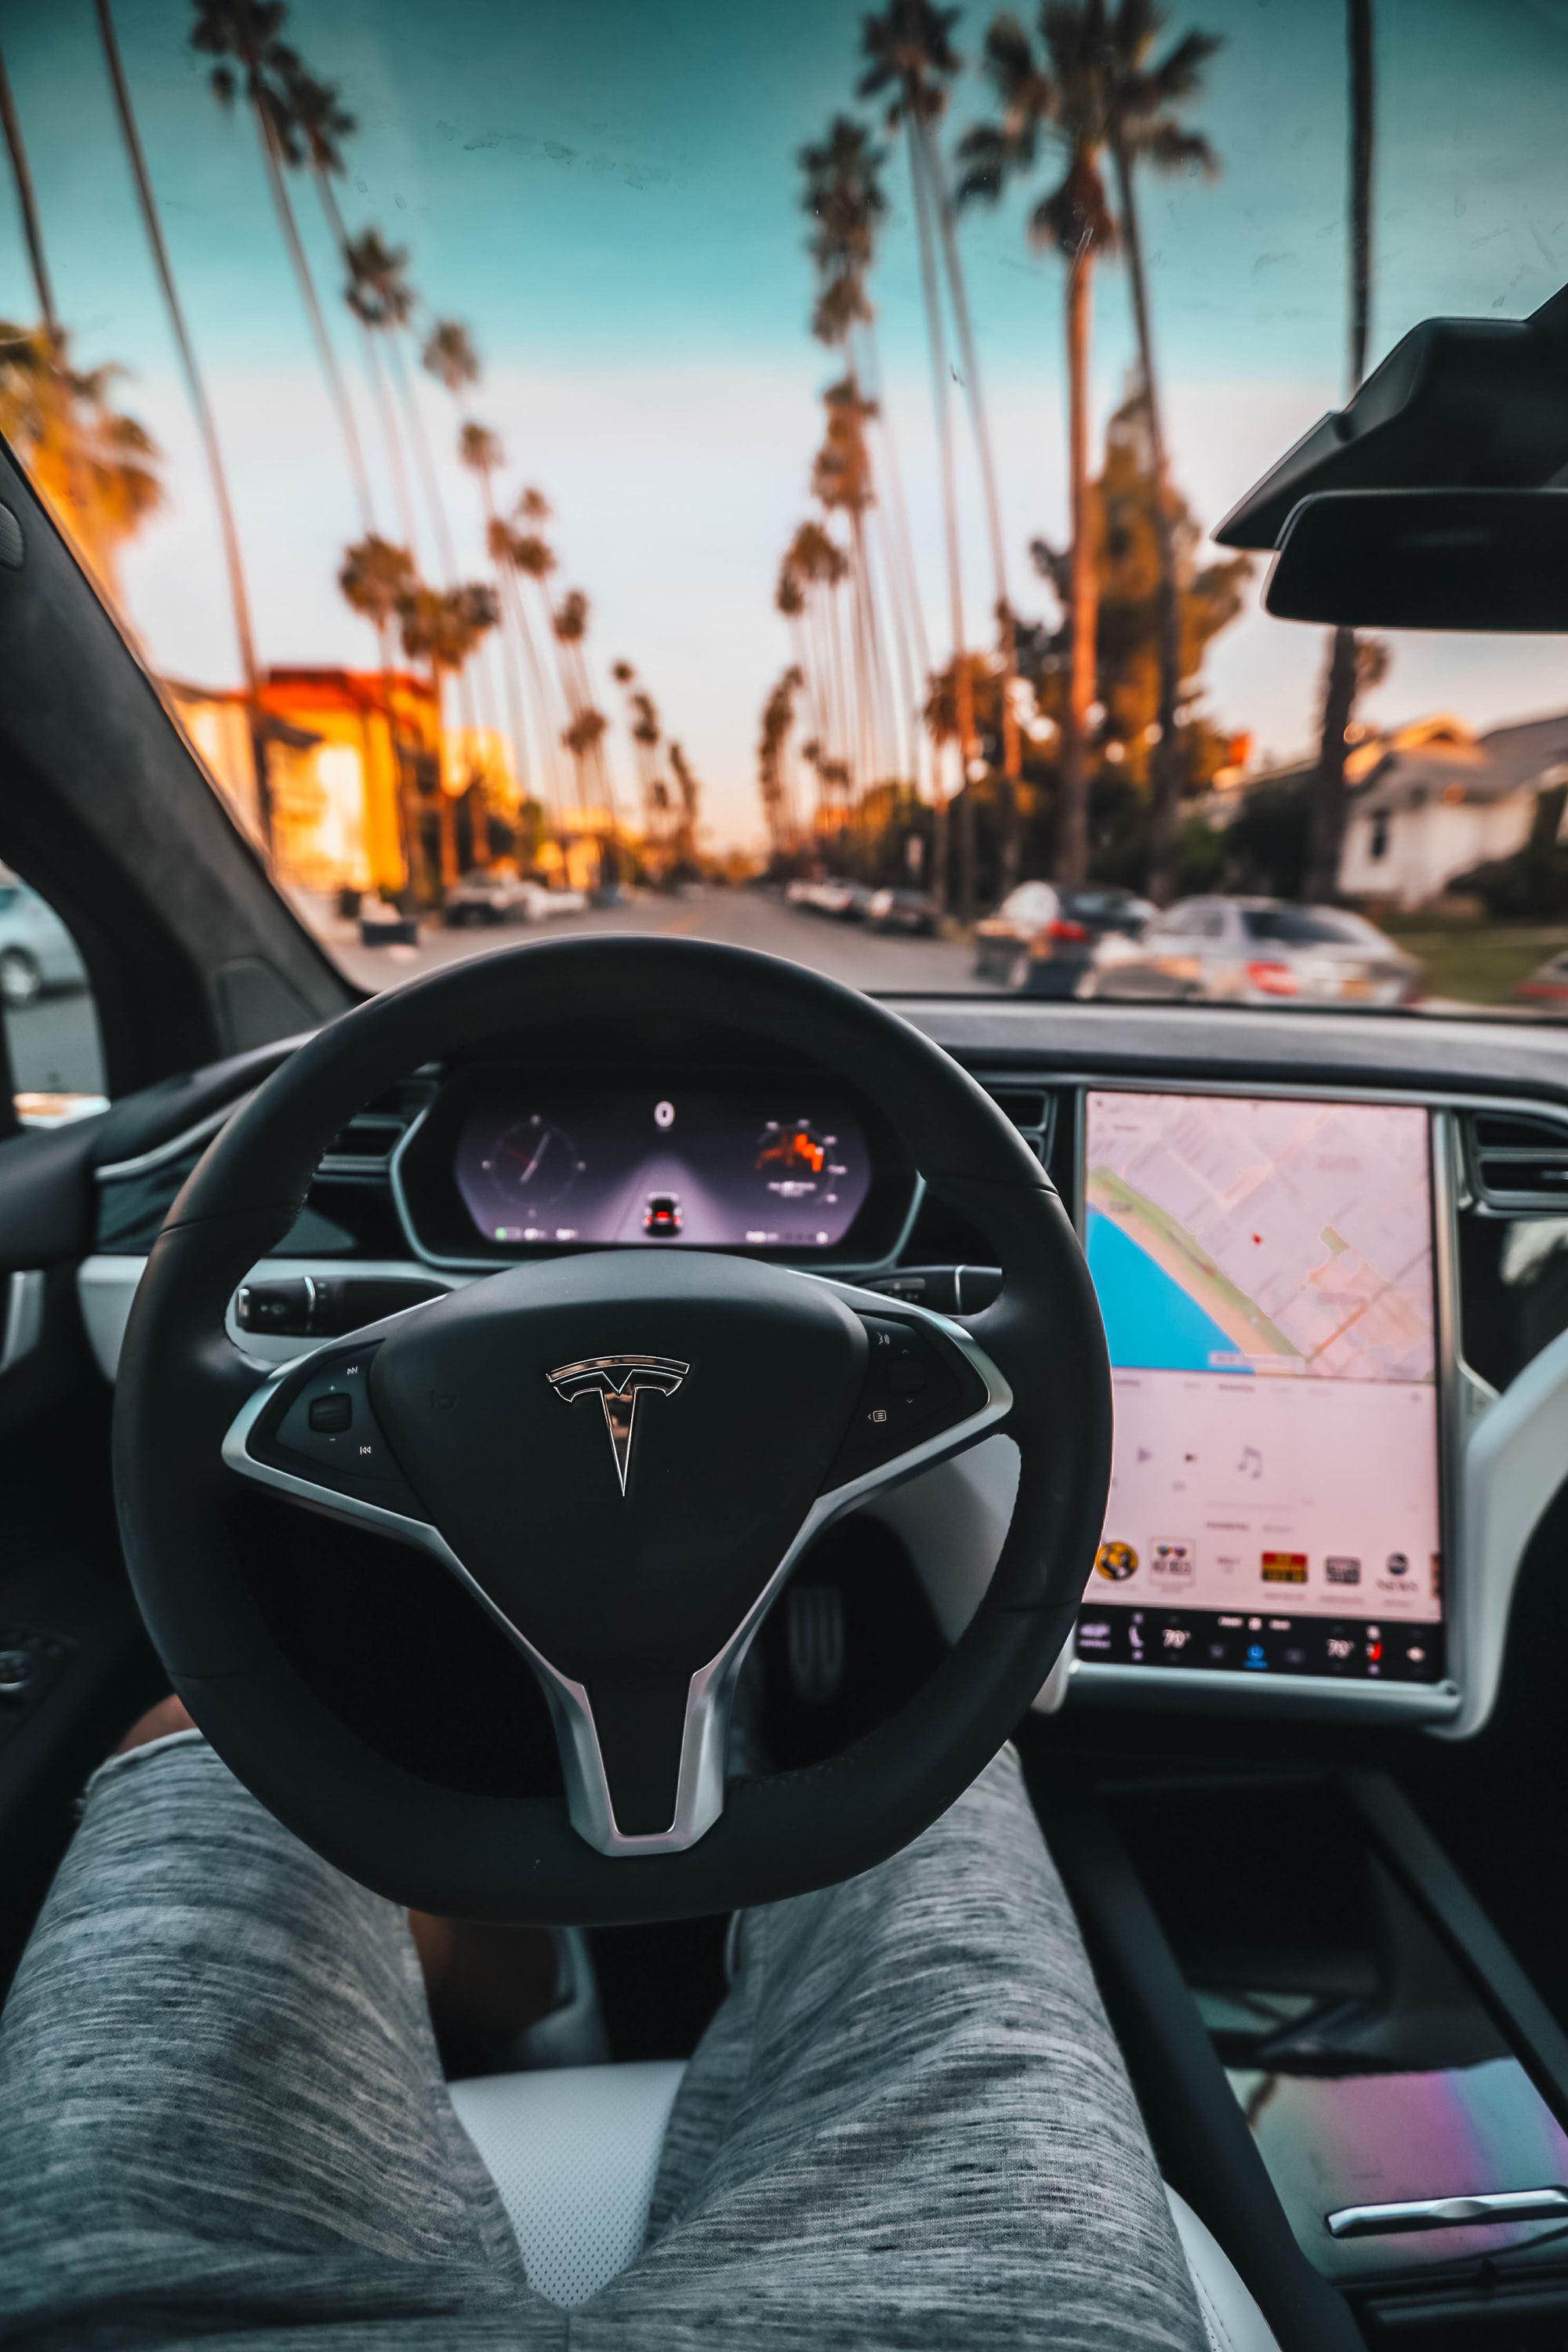 🚘 Tesla launches full self-driving beta and Waymo offers driverless taxi